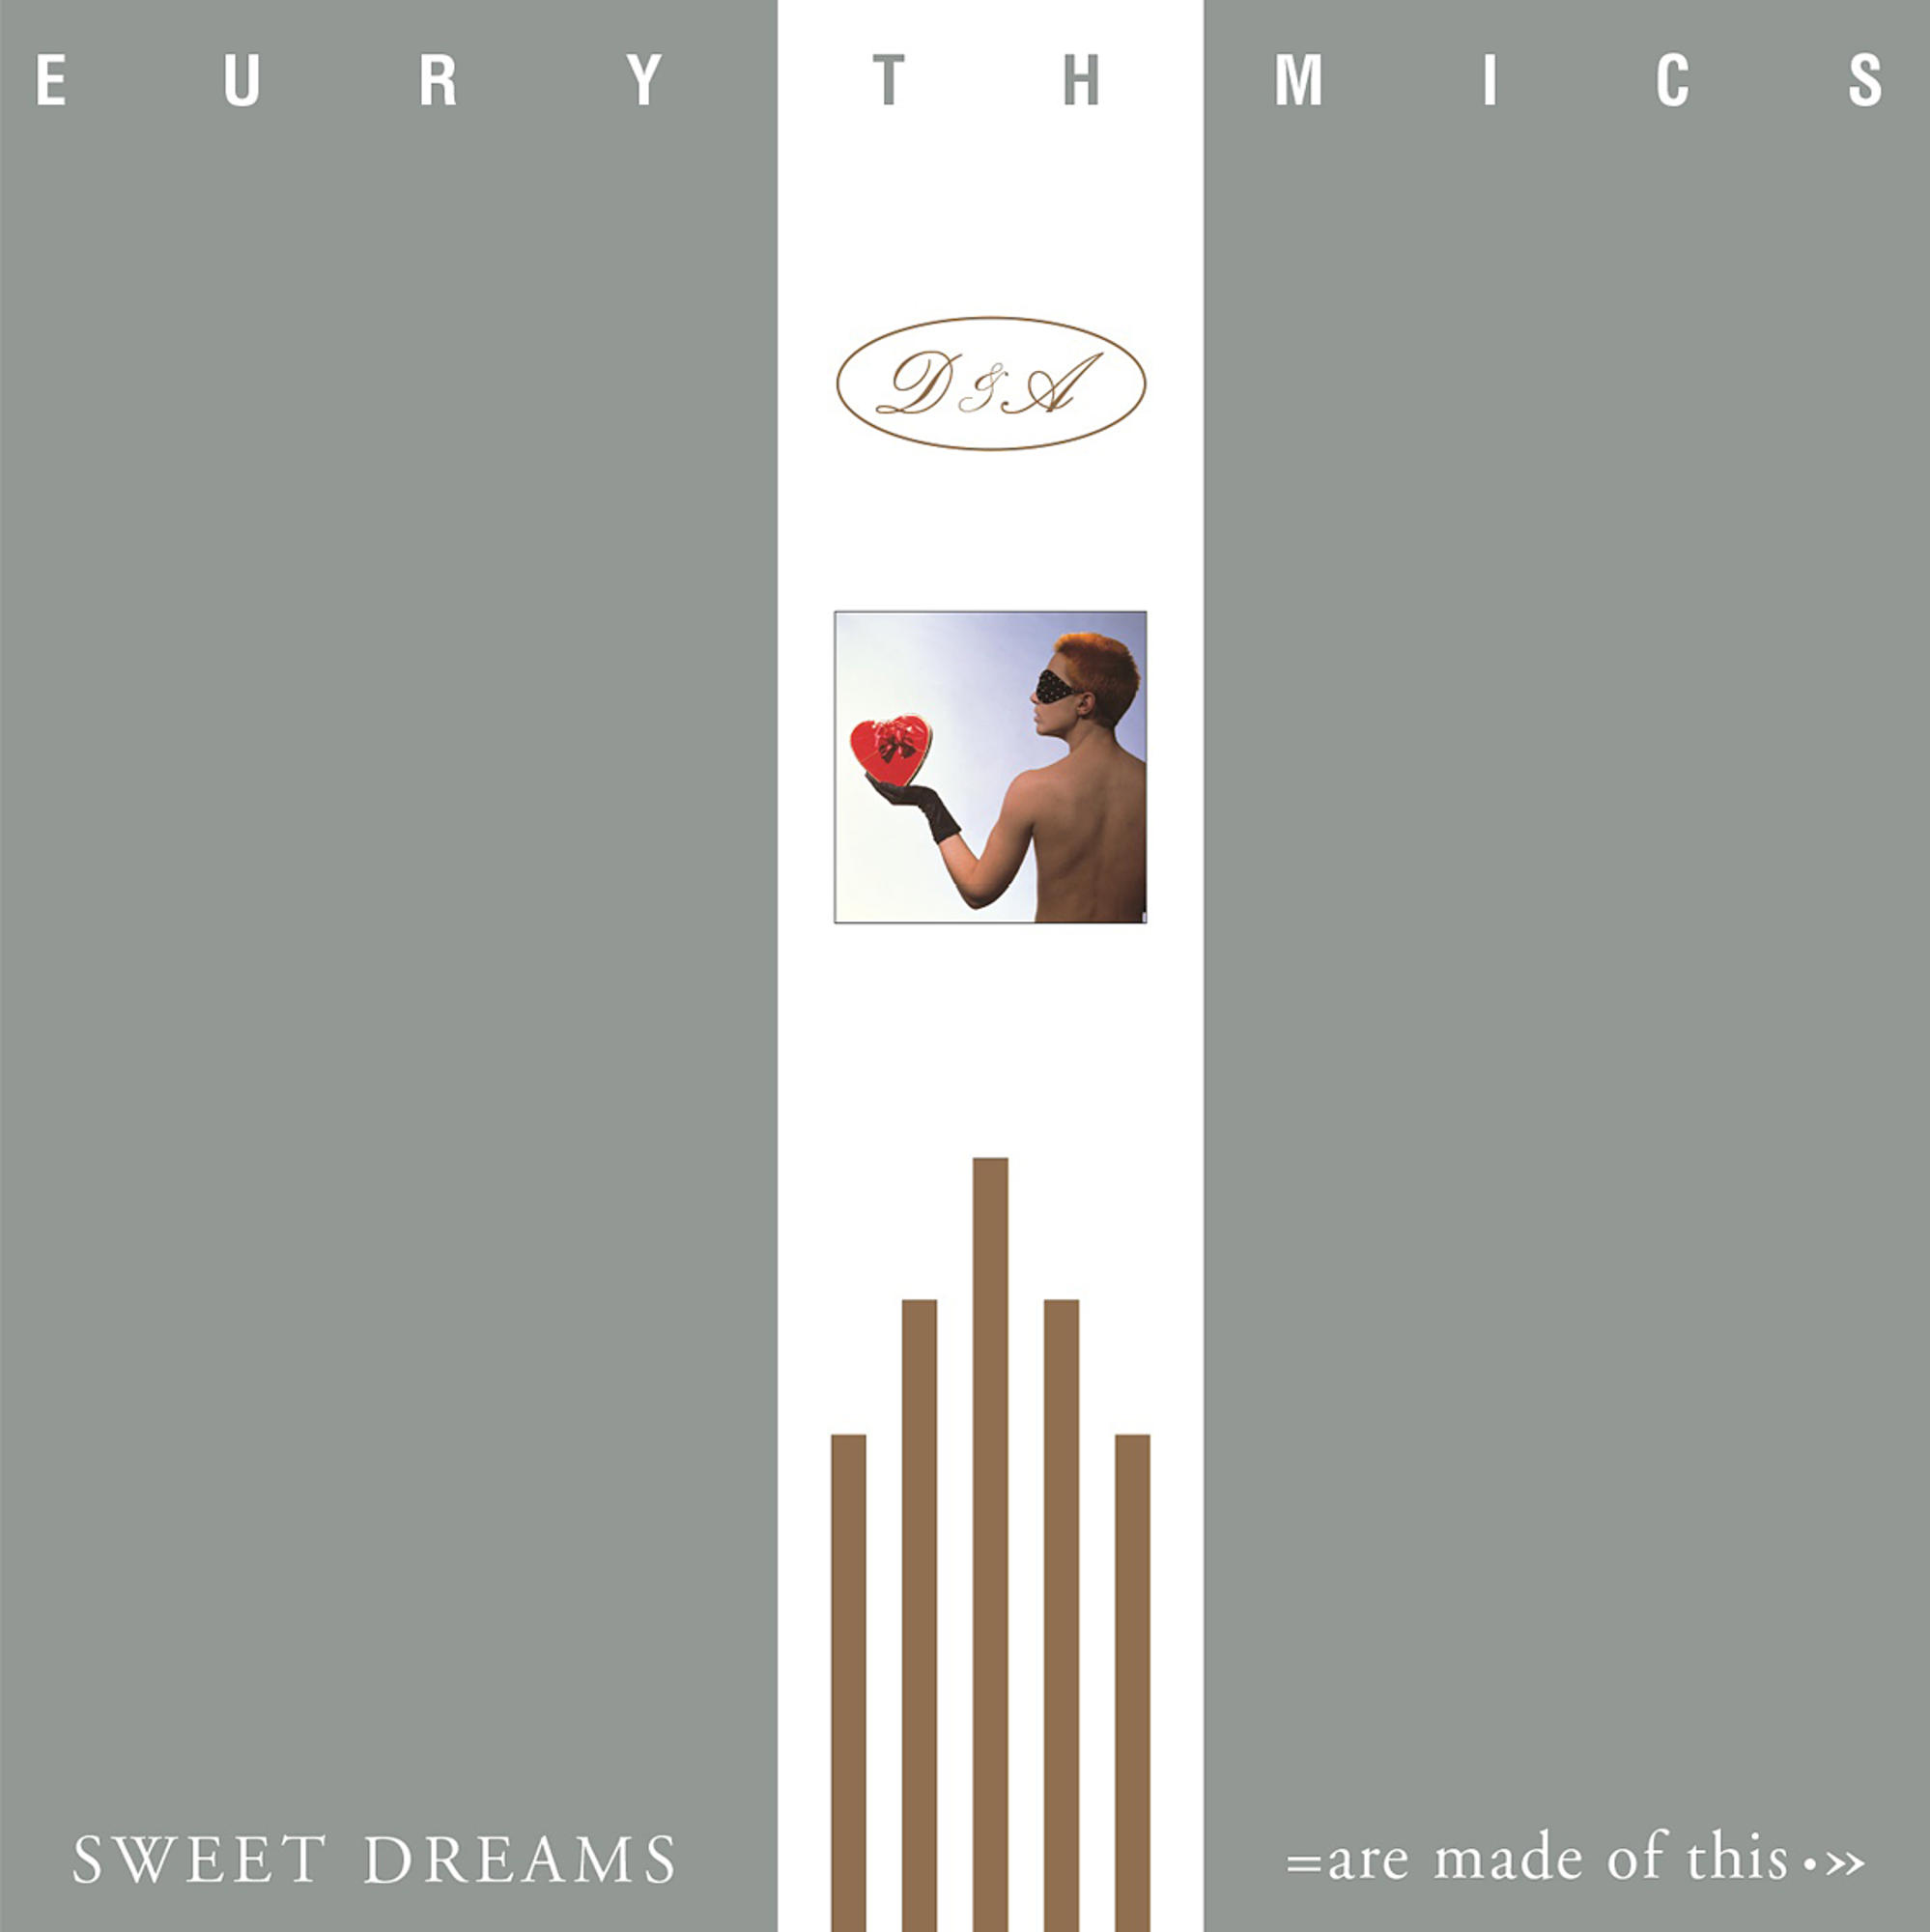 Eurythmics - Sweet Dreams Made of (Are This) (Vinyl) 